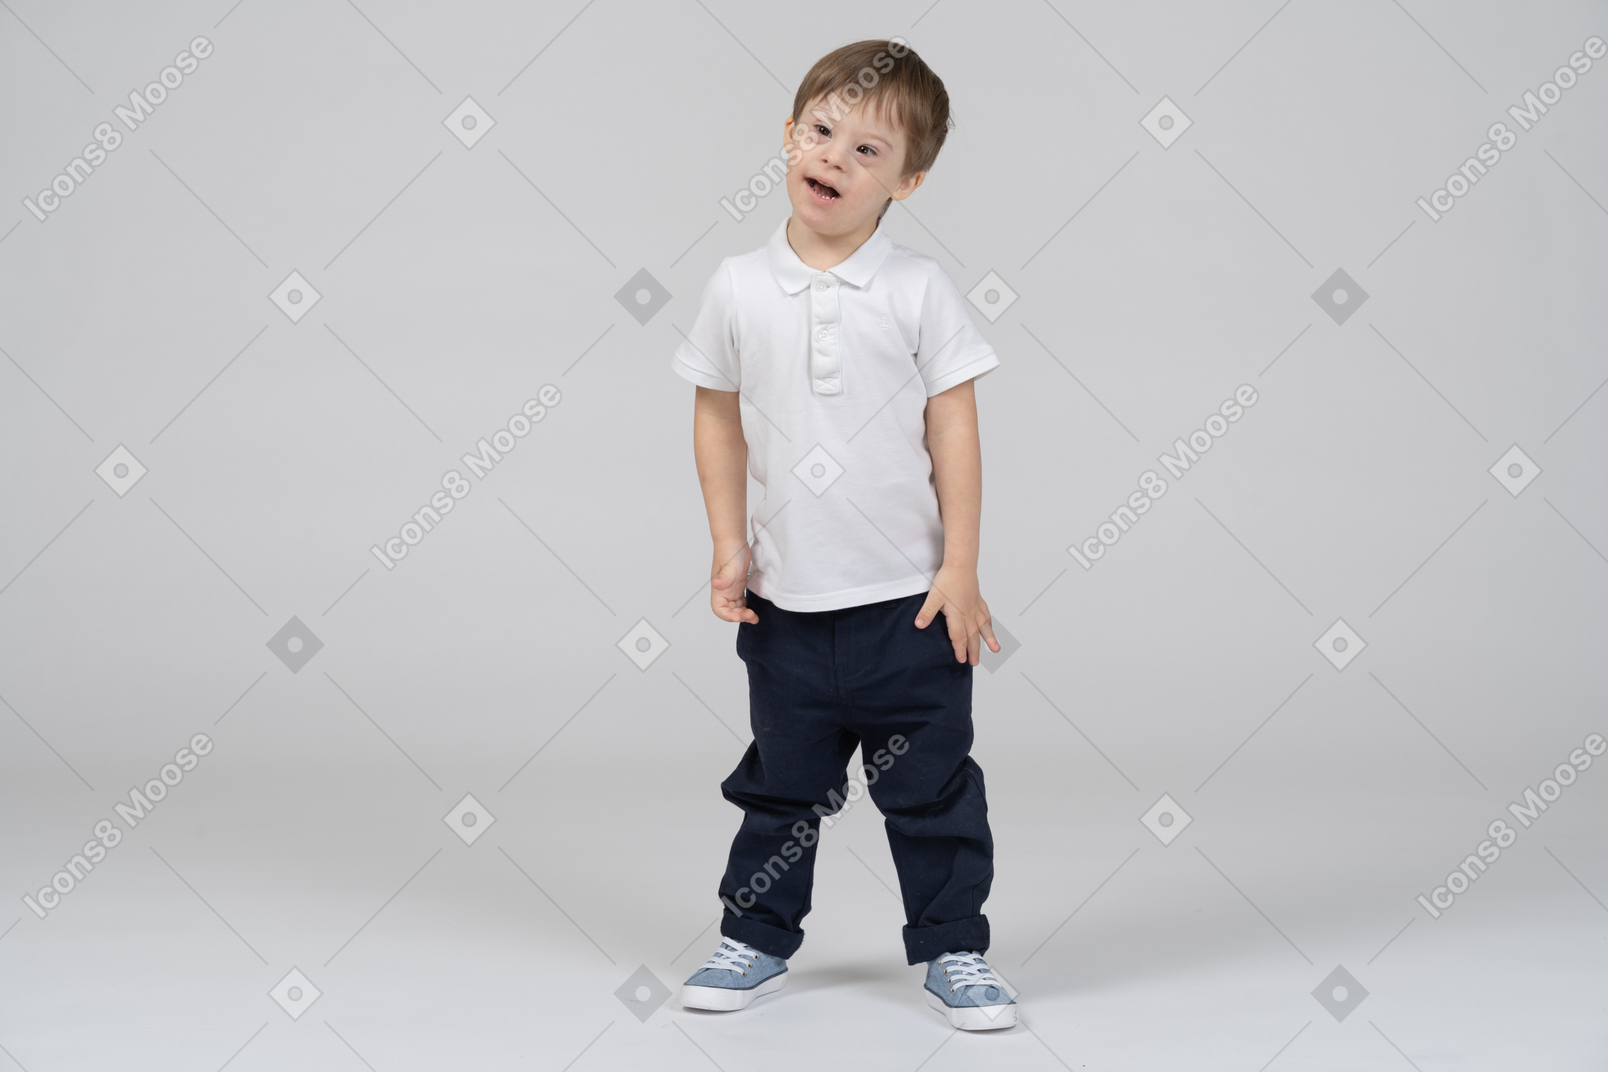 Confused little boy standing with arms at sides